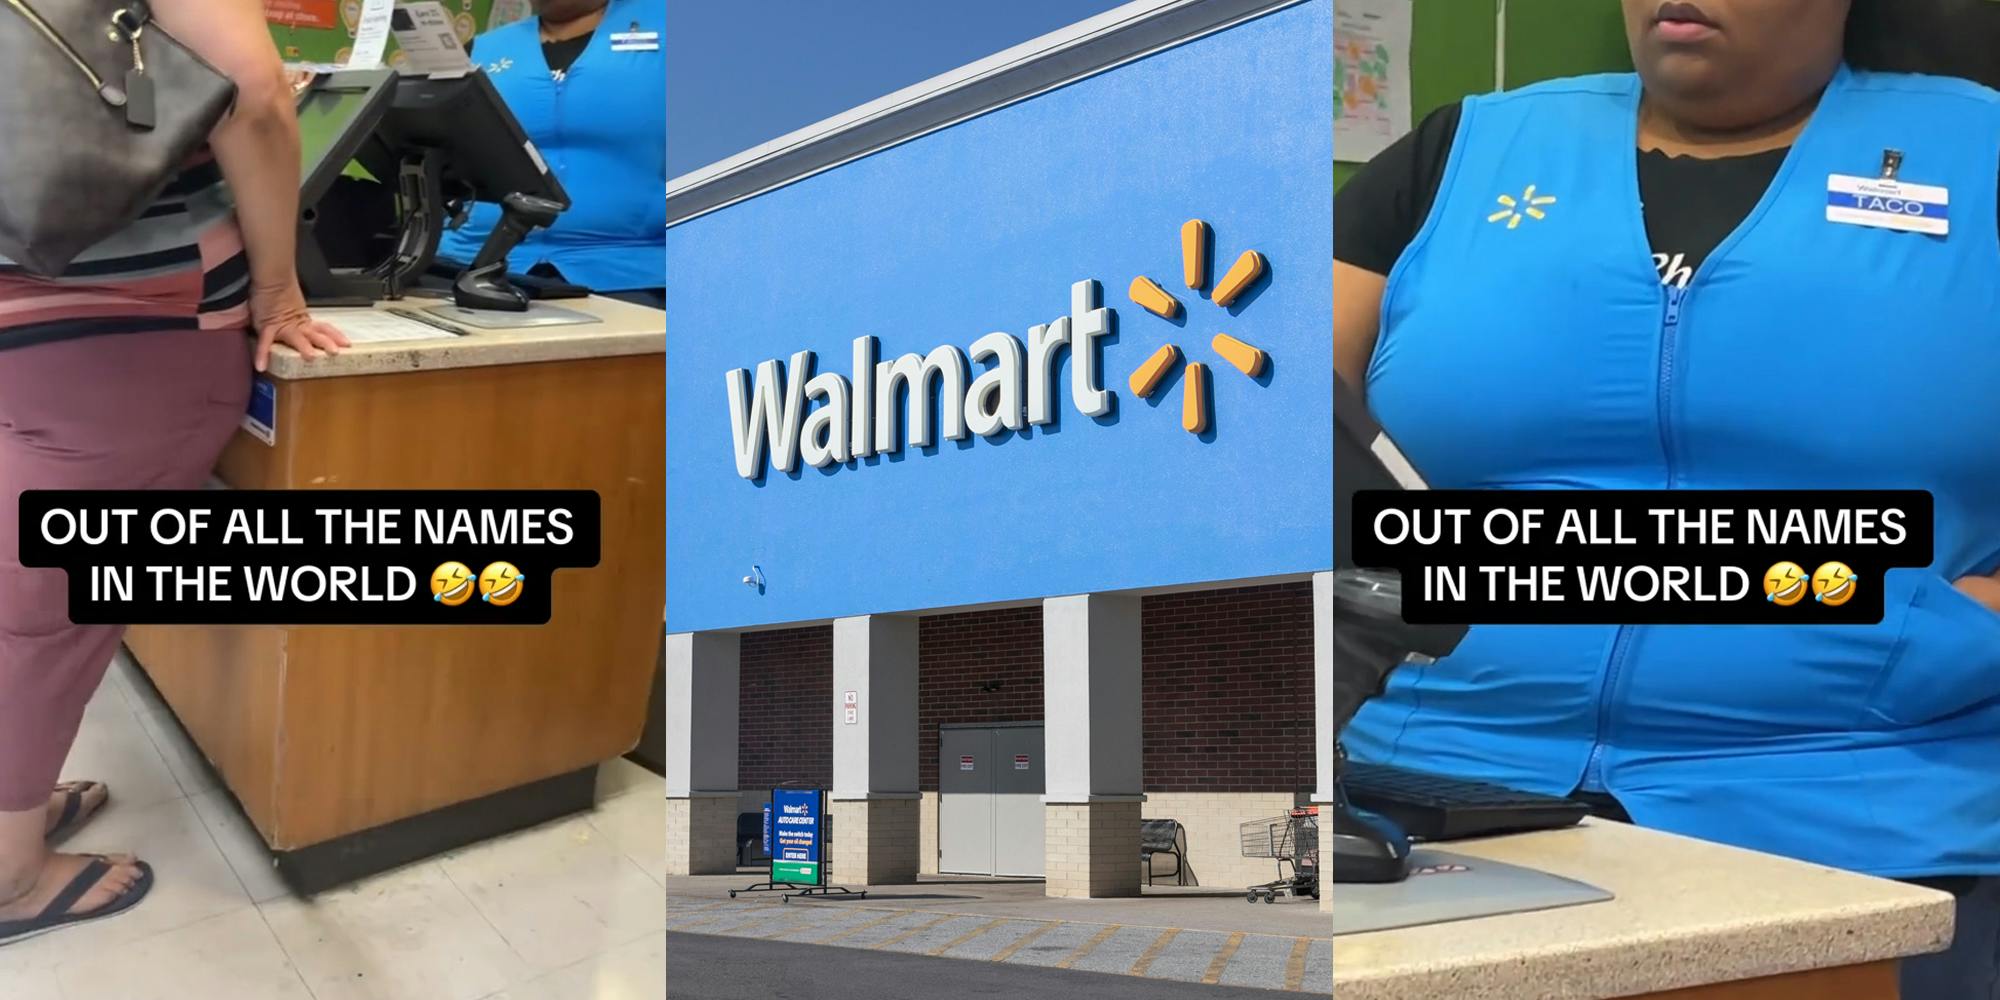 Walmart worker with caption "OUT OF ALL THE NAMES IN THE WORLD" (l) Walmart building with sign (c) Walmart worker with TACO nametag with caption "OUT OF ALL THE NAMES IN THE WORLD" (r)